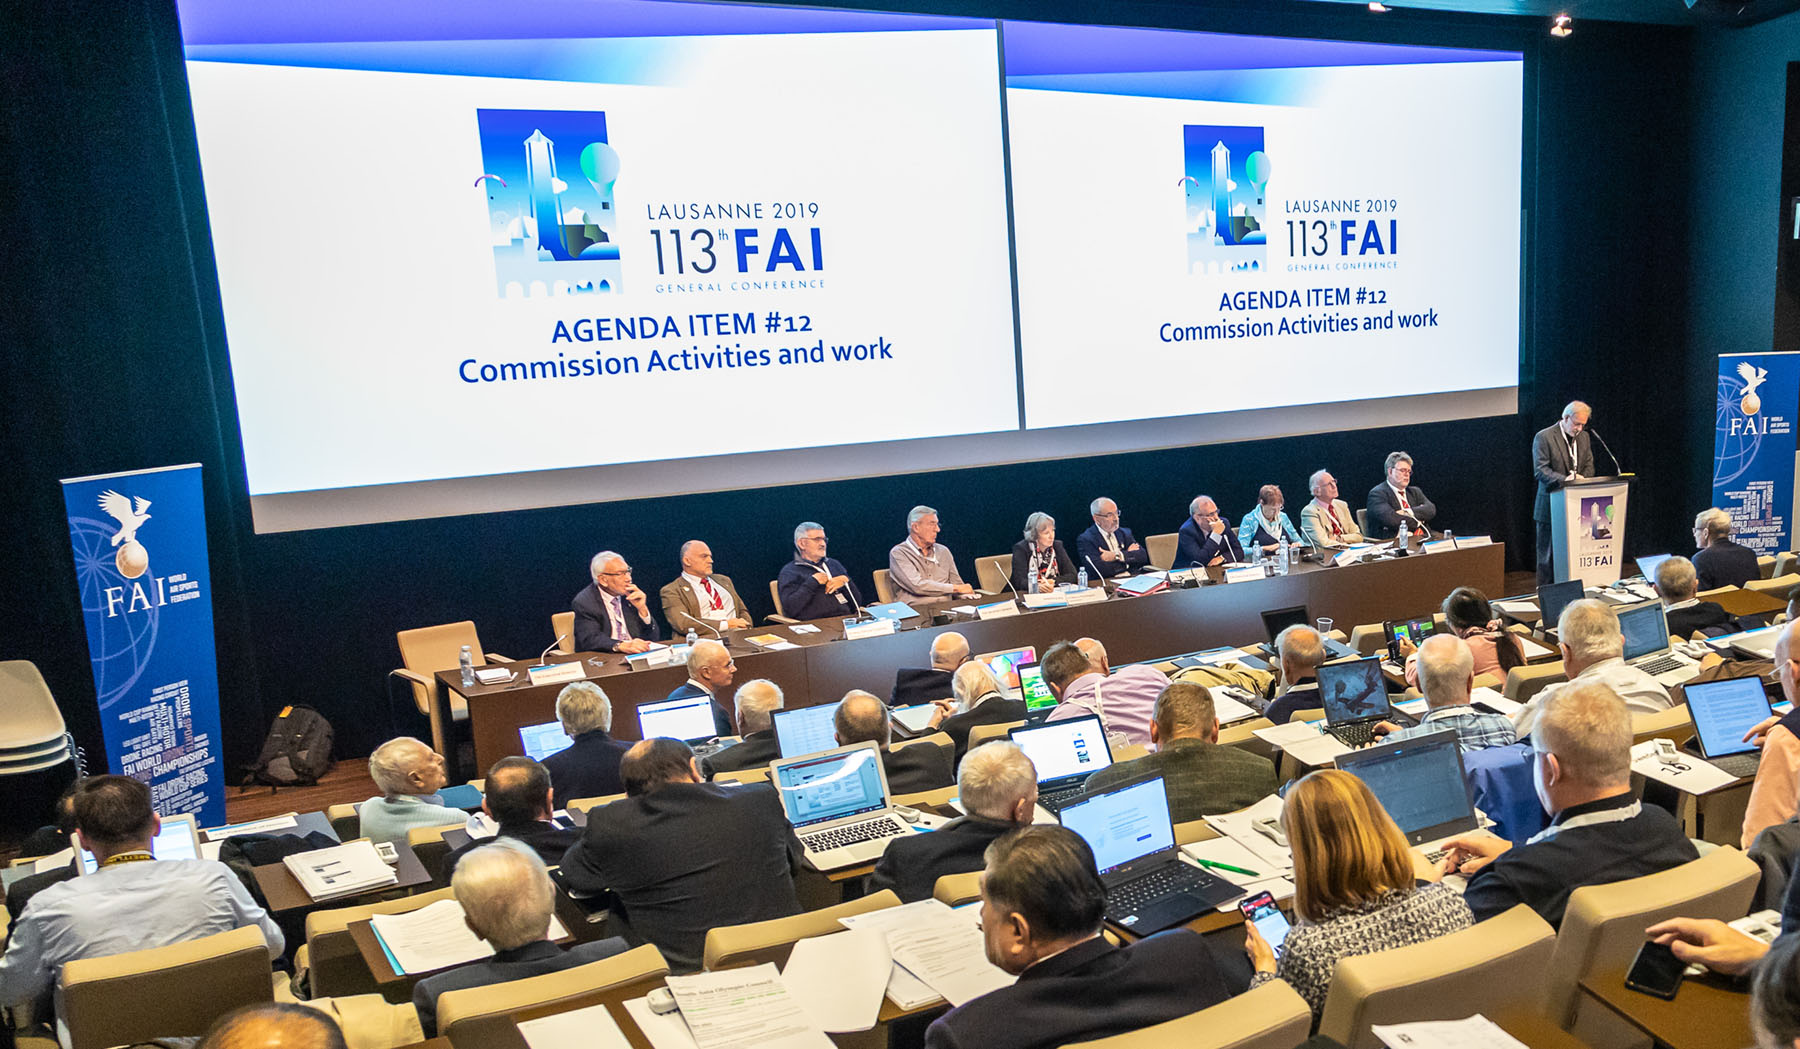 2019 FAI General Conference publication of the Minutes World Air